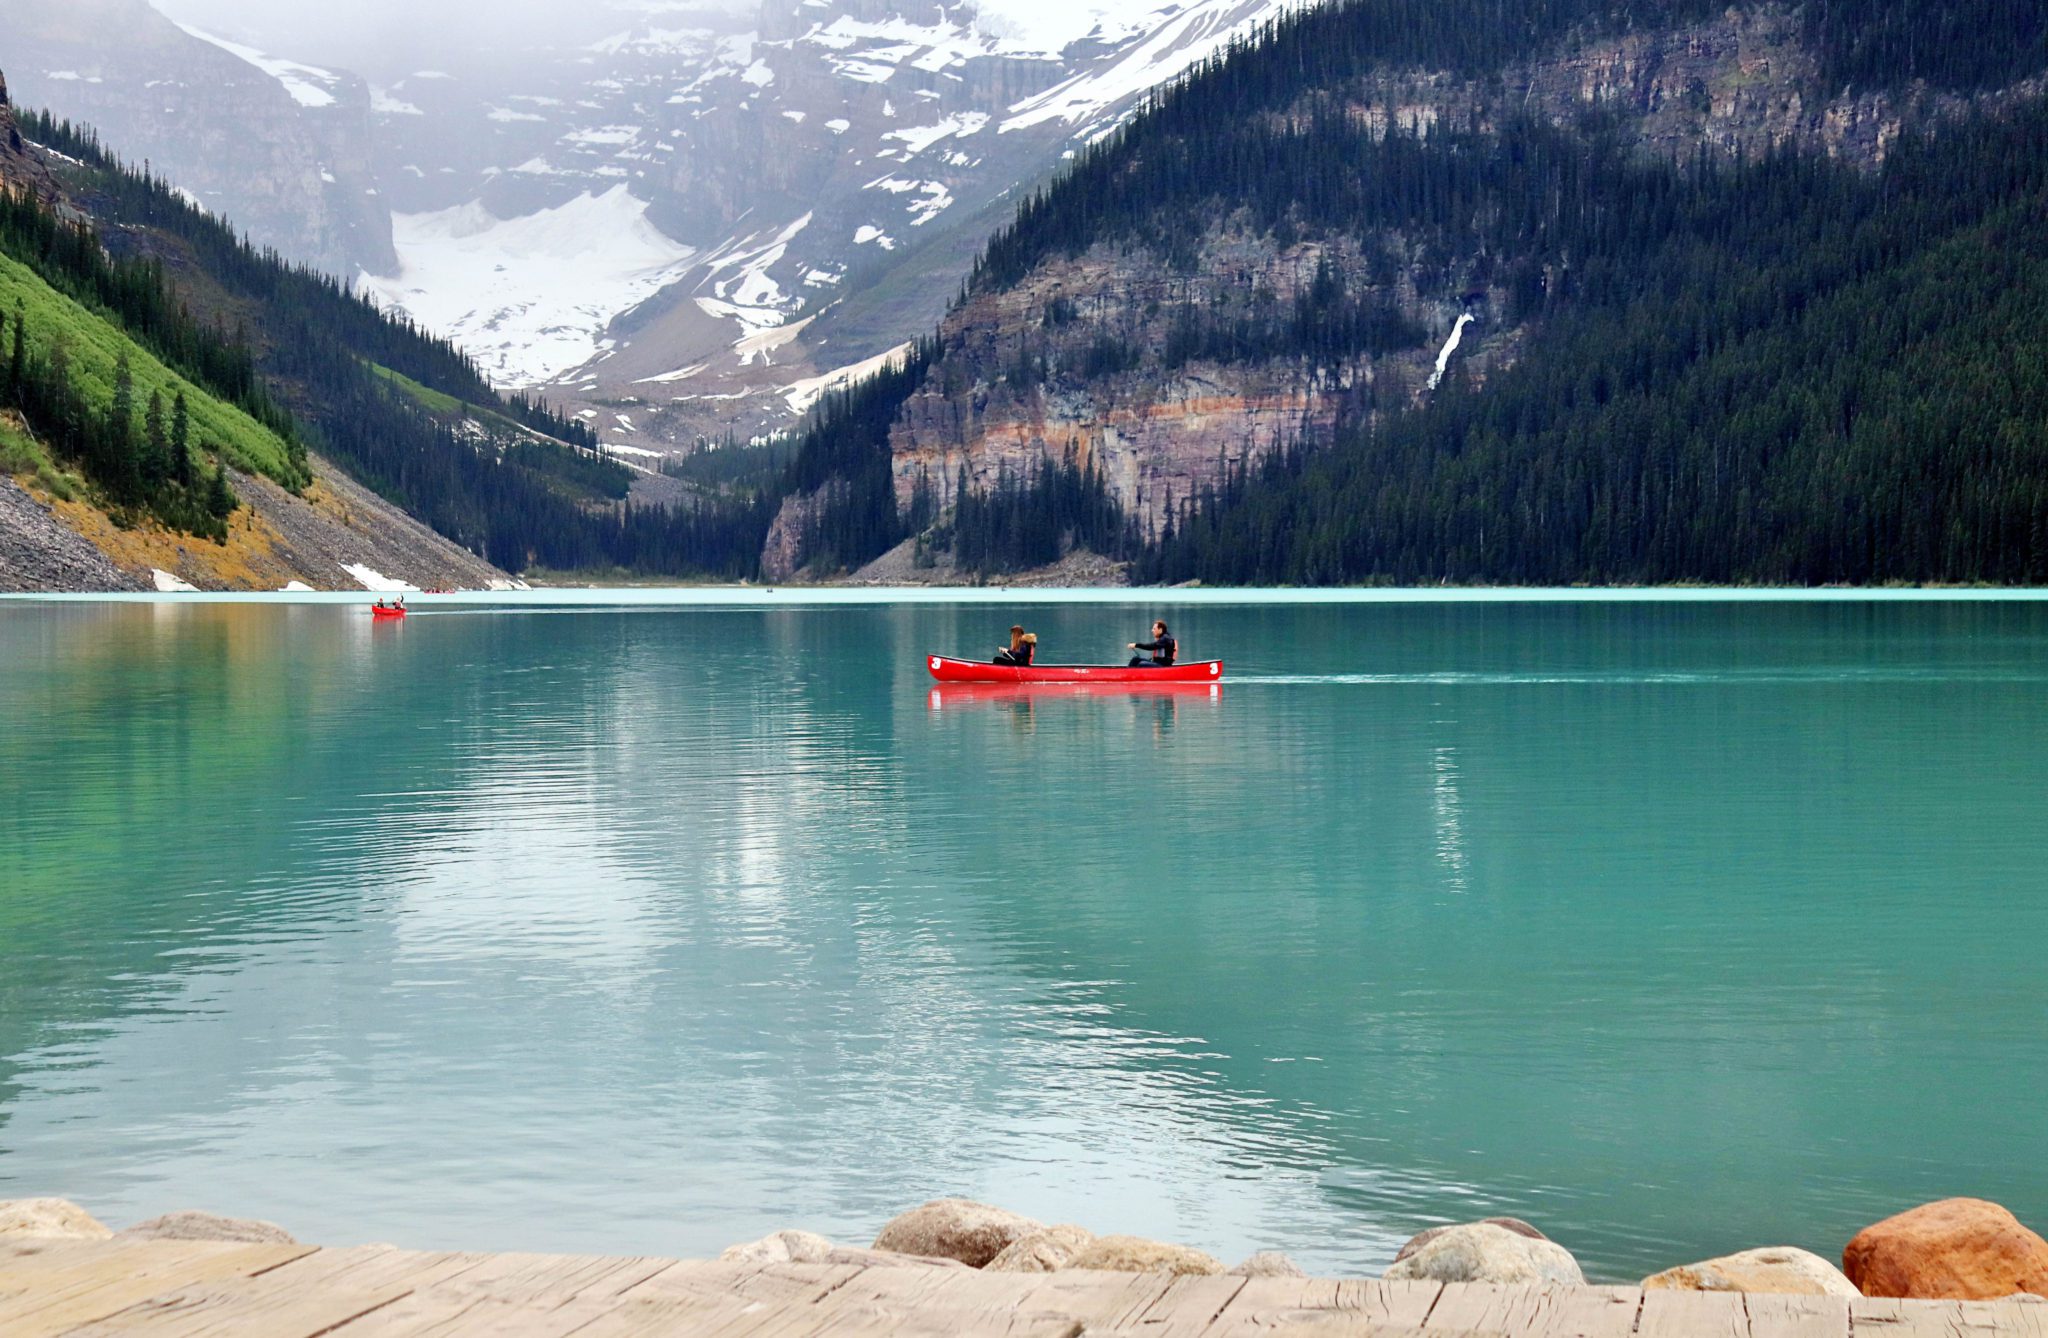 Tips for taking photos at Lake Louise | Banff Photography Guide: 15 Amazing Spots to take Photos in Banff | Simply Wander #banff #canada #simplywander #lakelouise